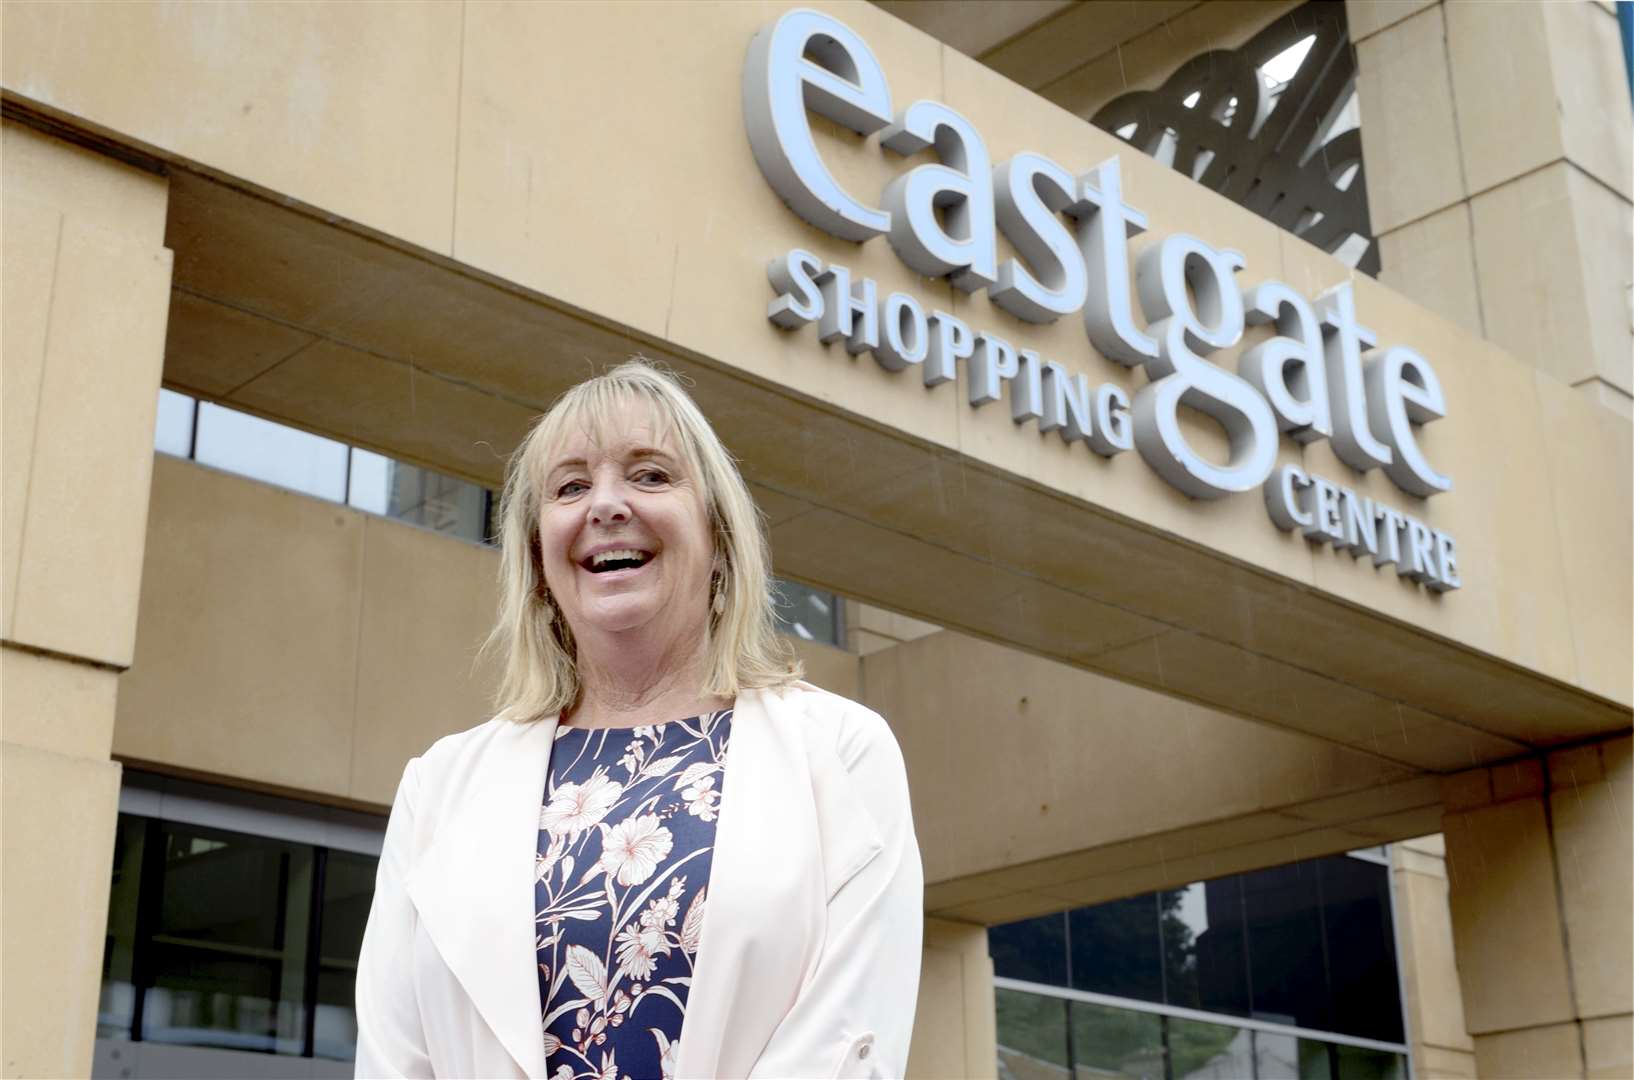 Jackie Cuddy, manager for the Eastgate Shopping Centre.